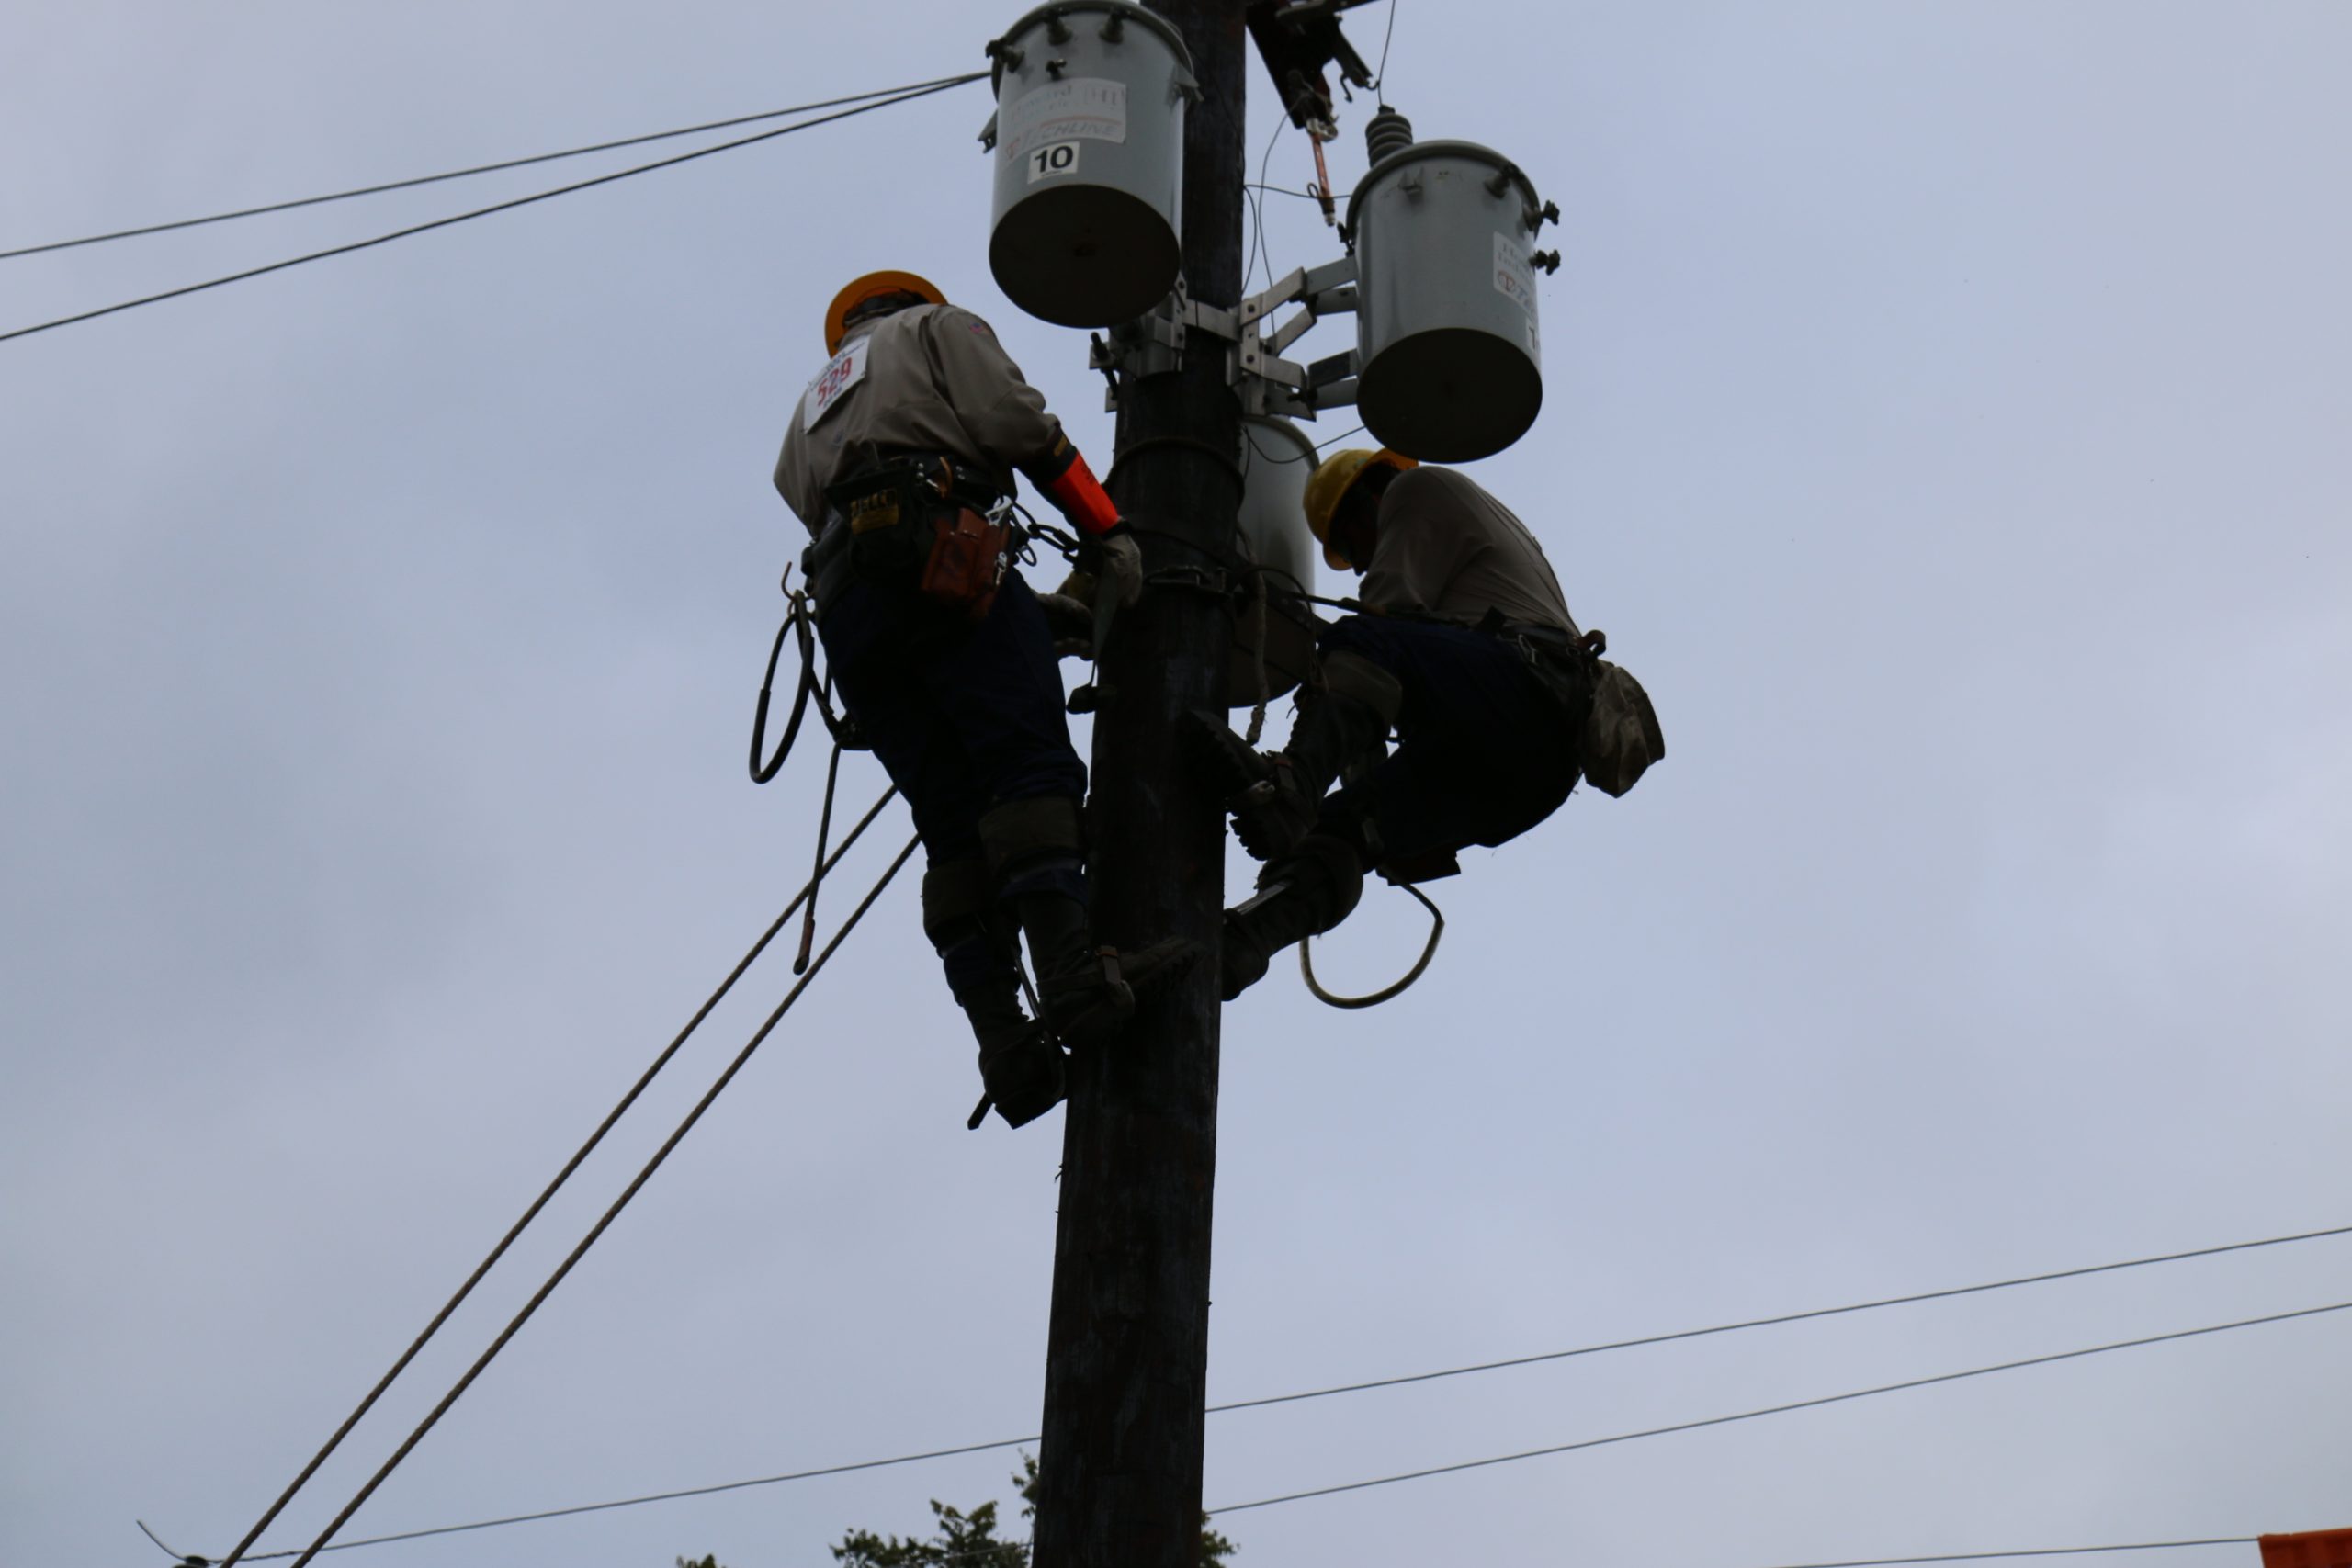 Two GVEC linemen at the top of a pole, competing at the Texas Lineman's Rodeo